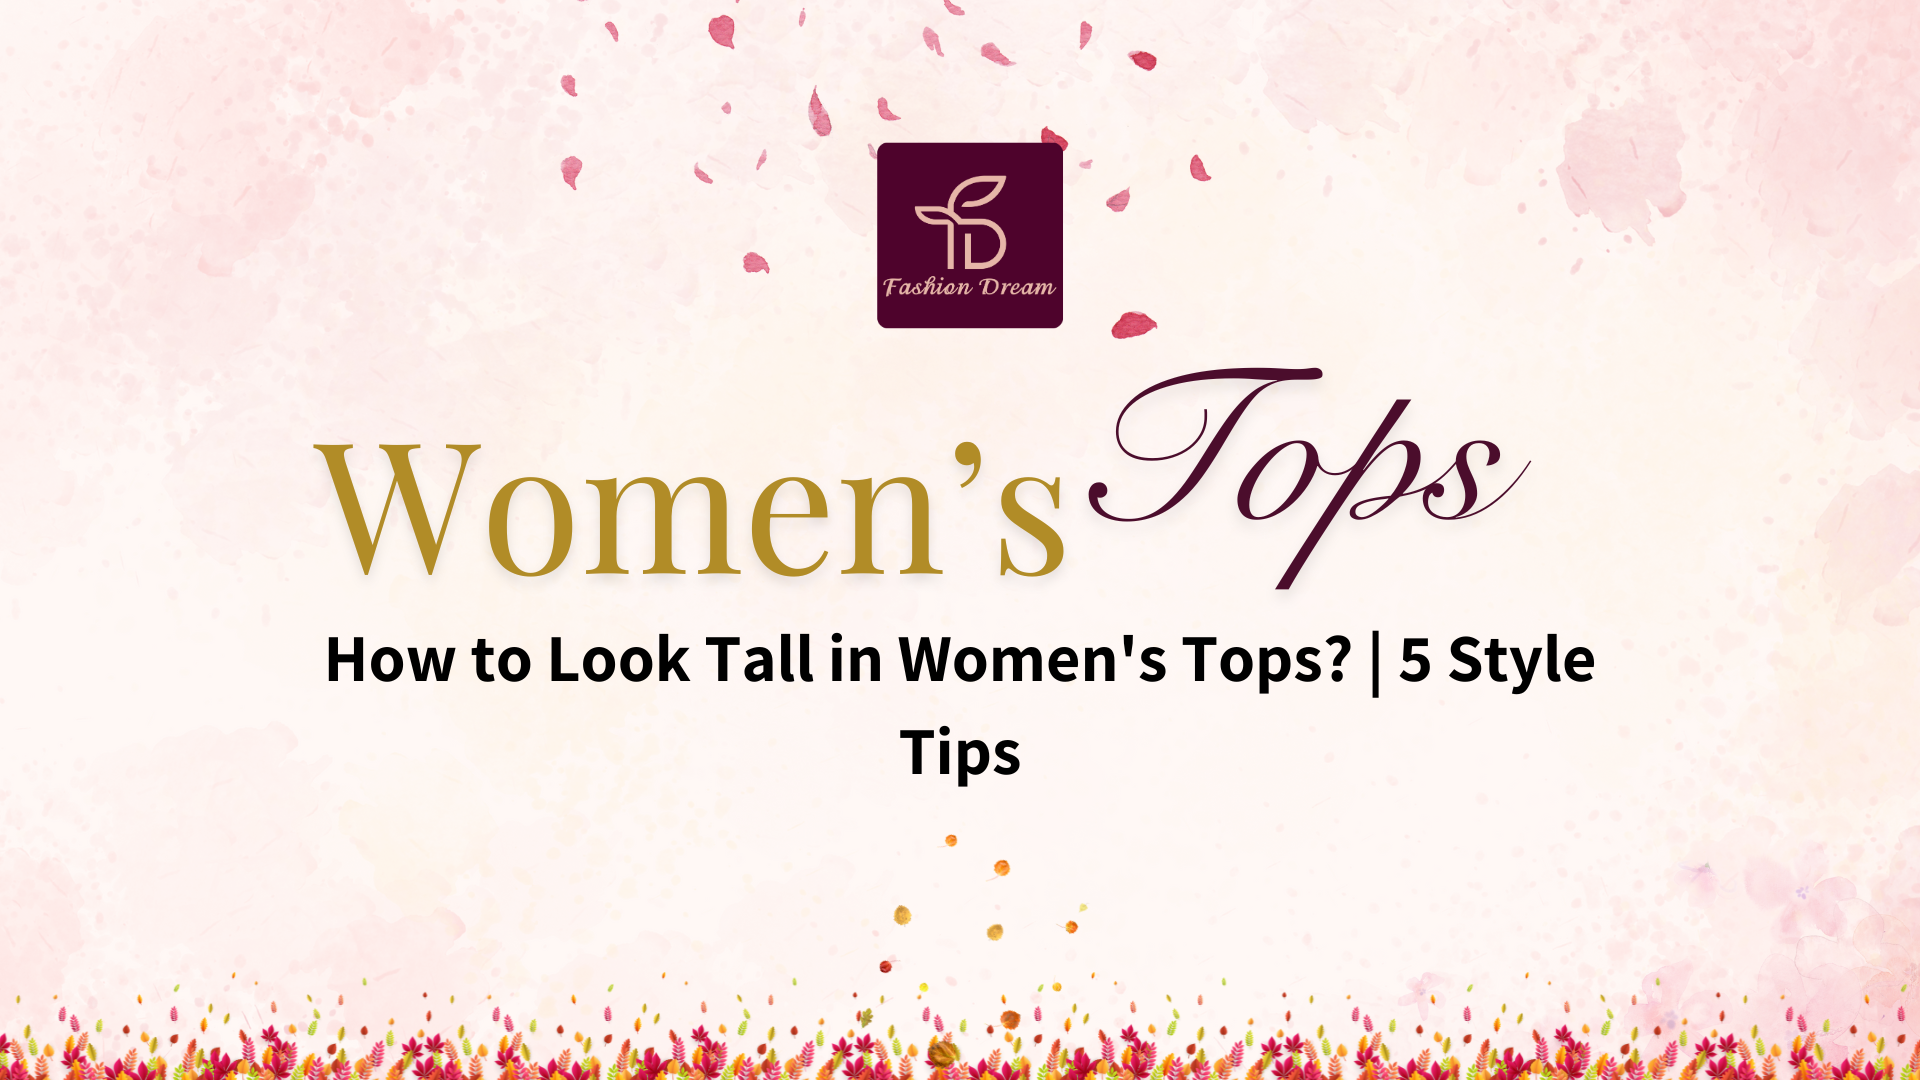 How to Look Tall in Women's Tops? | 5 Style Tips